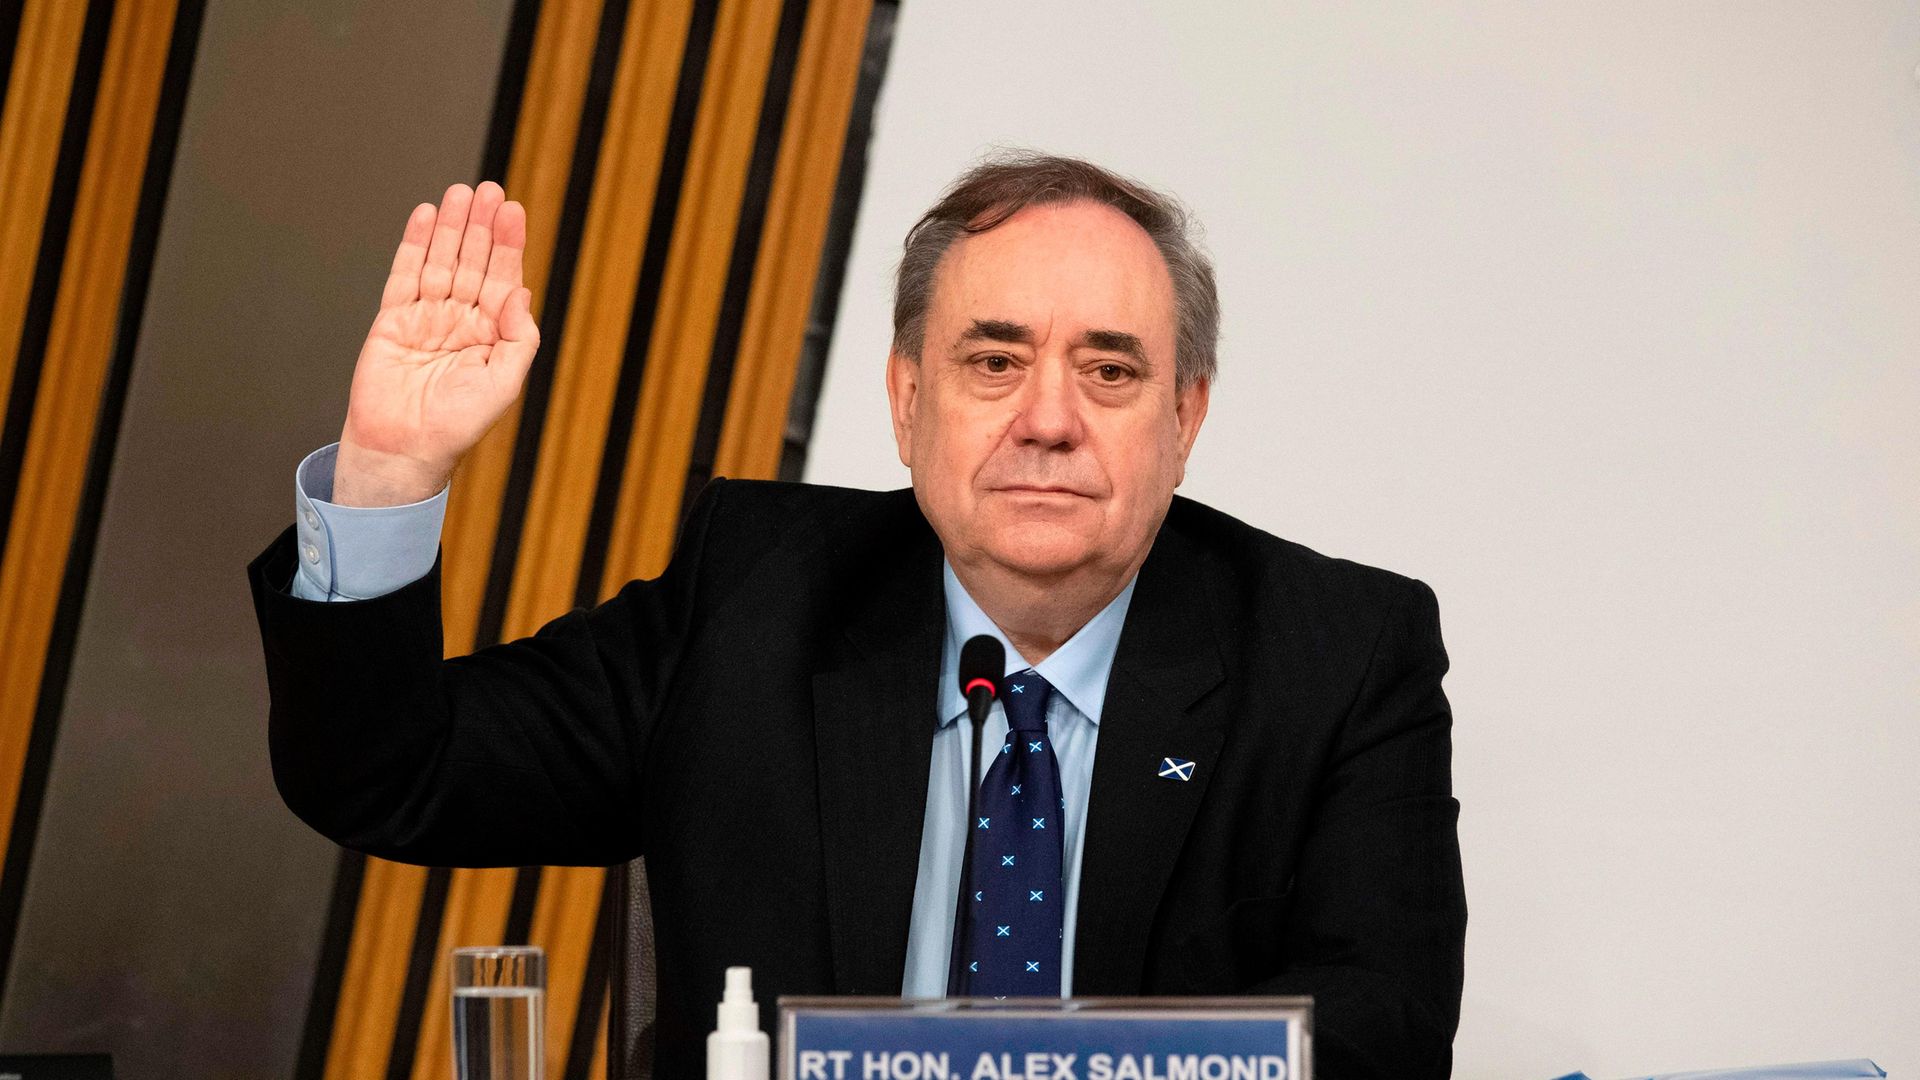 Former SNP leader and former first minister of Scotland Alex Salmond is sworn in before giving his evidence to the Holyrood committee investigating the handling of harassment allegations against him - Credit: POOL/AFP via Getty Images